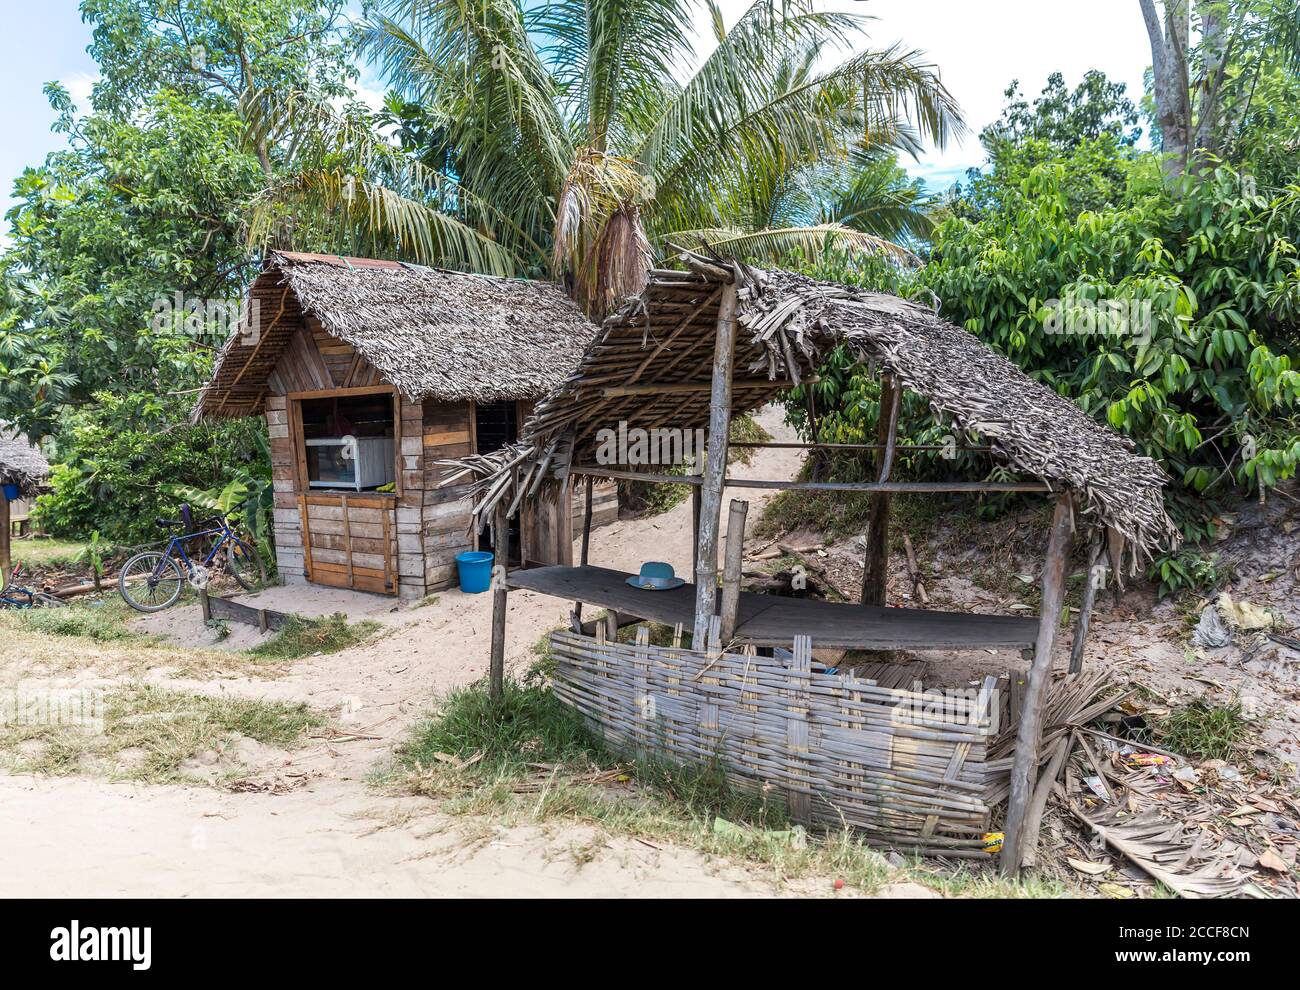 Simple wooden hut covered with palm leaves, Ivoloina, Taomasina, Tamatave, Madagascar, Africa, Indian Ocean Stock Photo